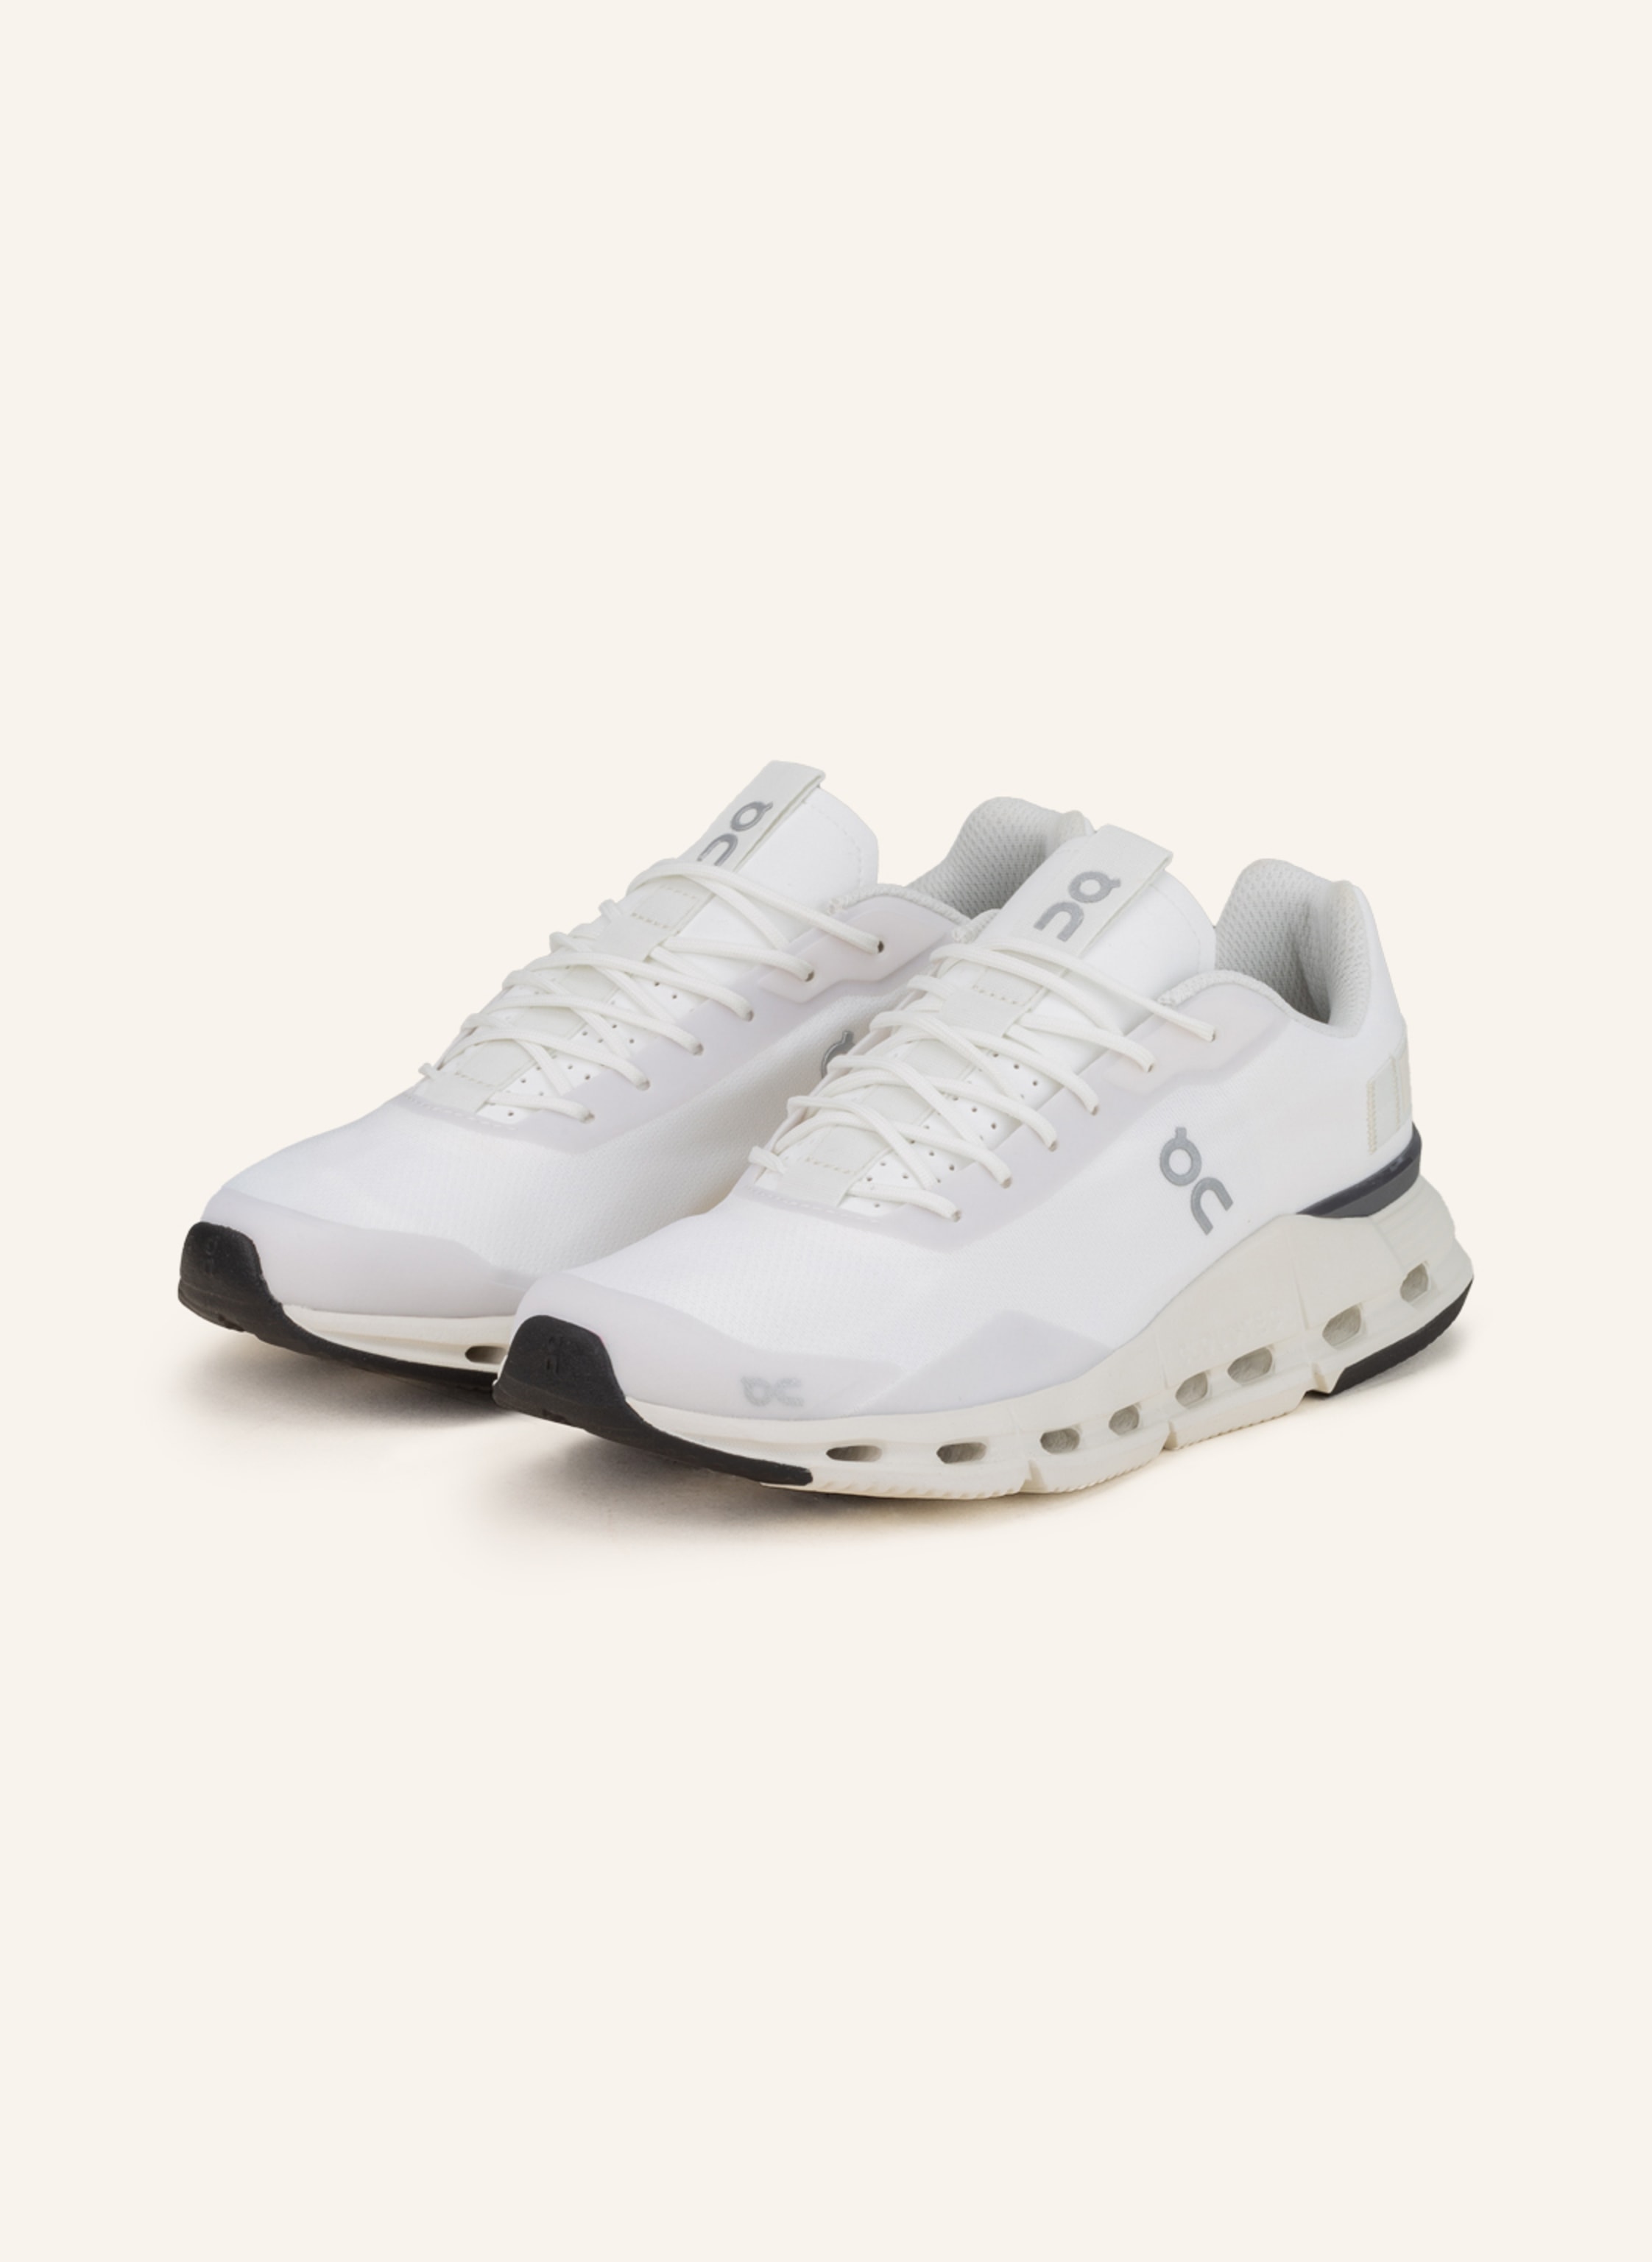 On Sneakers CLOUDNOVA FORM in white/ cream/ light gray